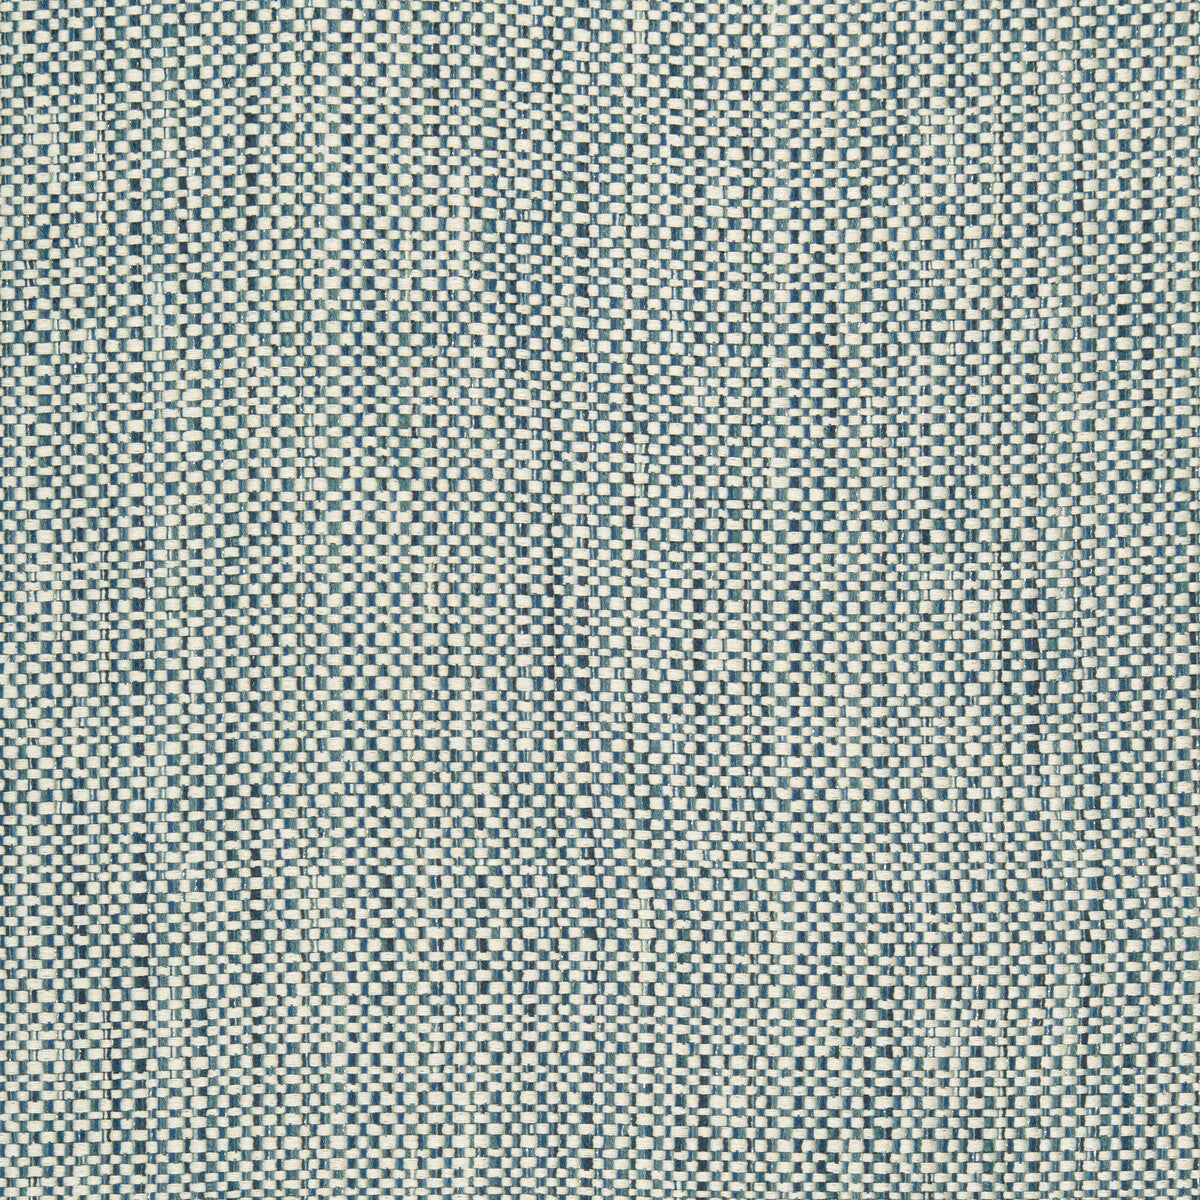 Kravet Design fabric in 34683-5 color - pattern 34683.5.0 - by Kravet Design in the Performance Crypton Home collection